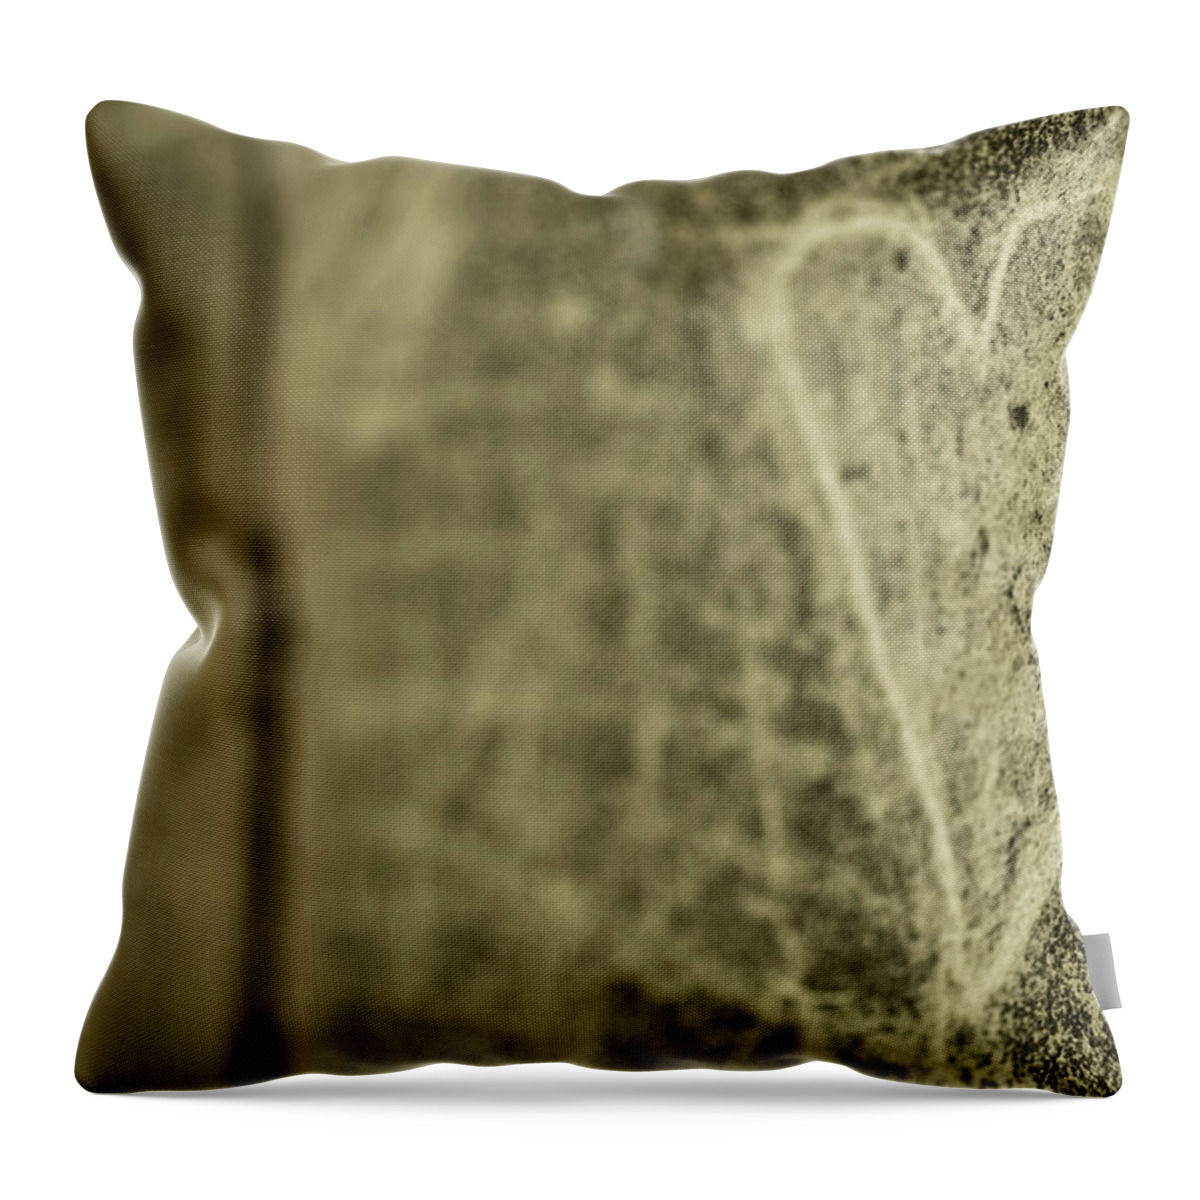 Engraving Throw Pillow featuring the photograph Heart Engraved On A Wall by G.g.bruno